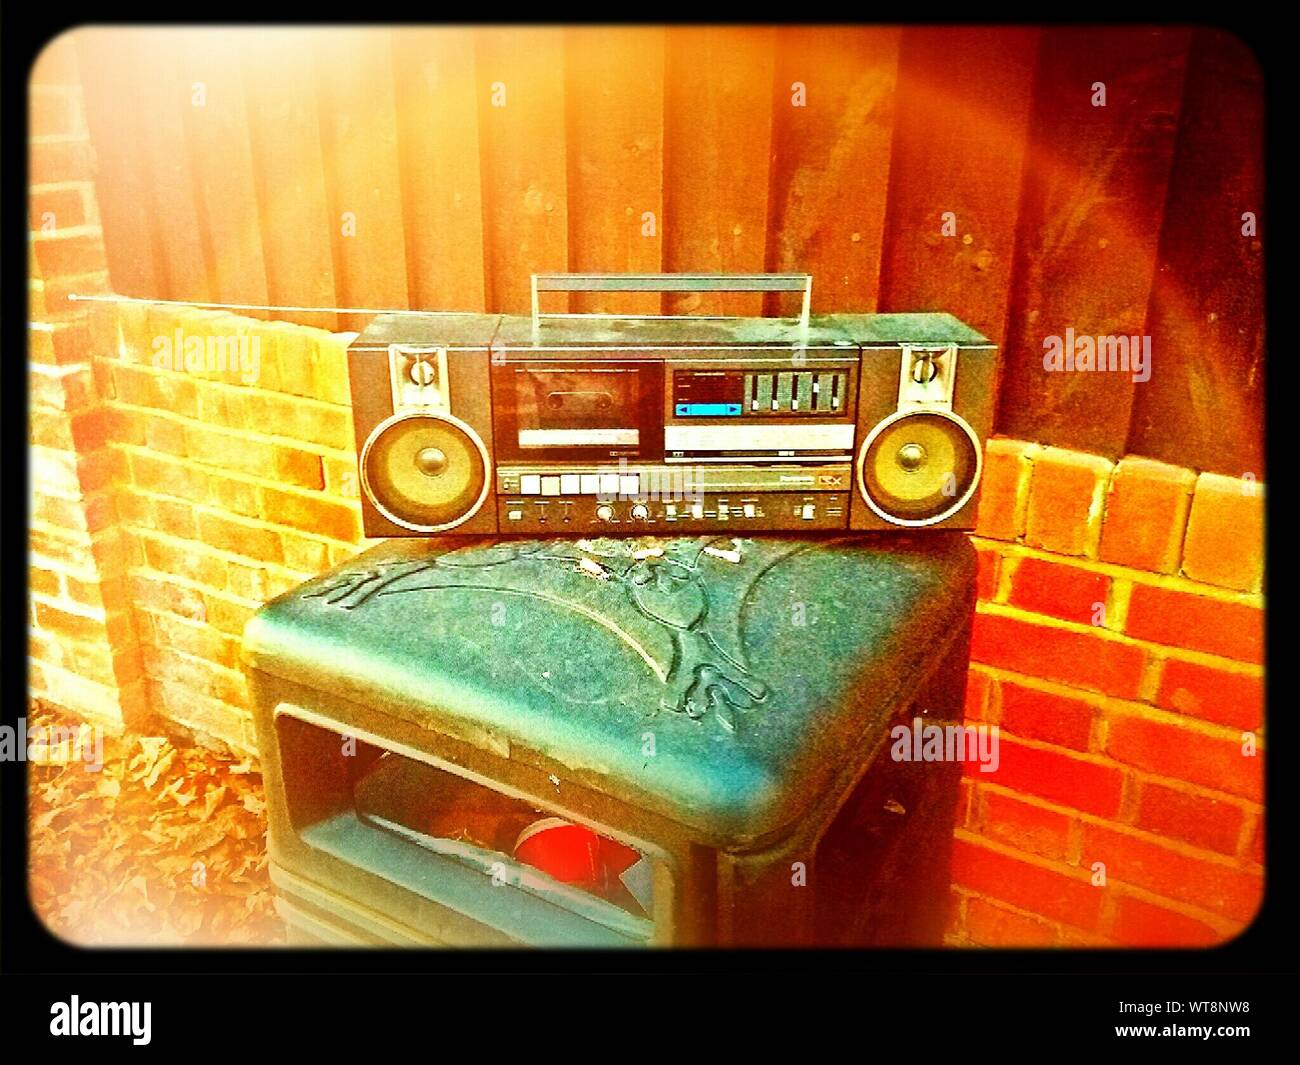 High Angle View Of Ghetto Blaster On Table Stock Photo